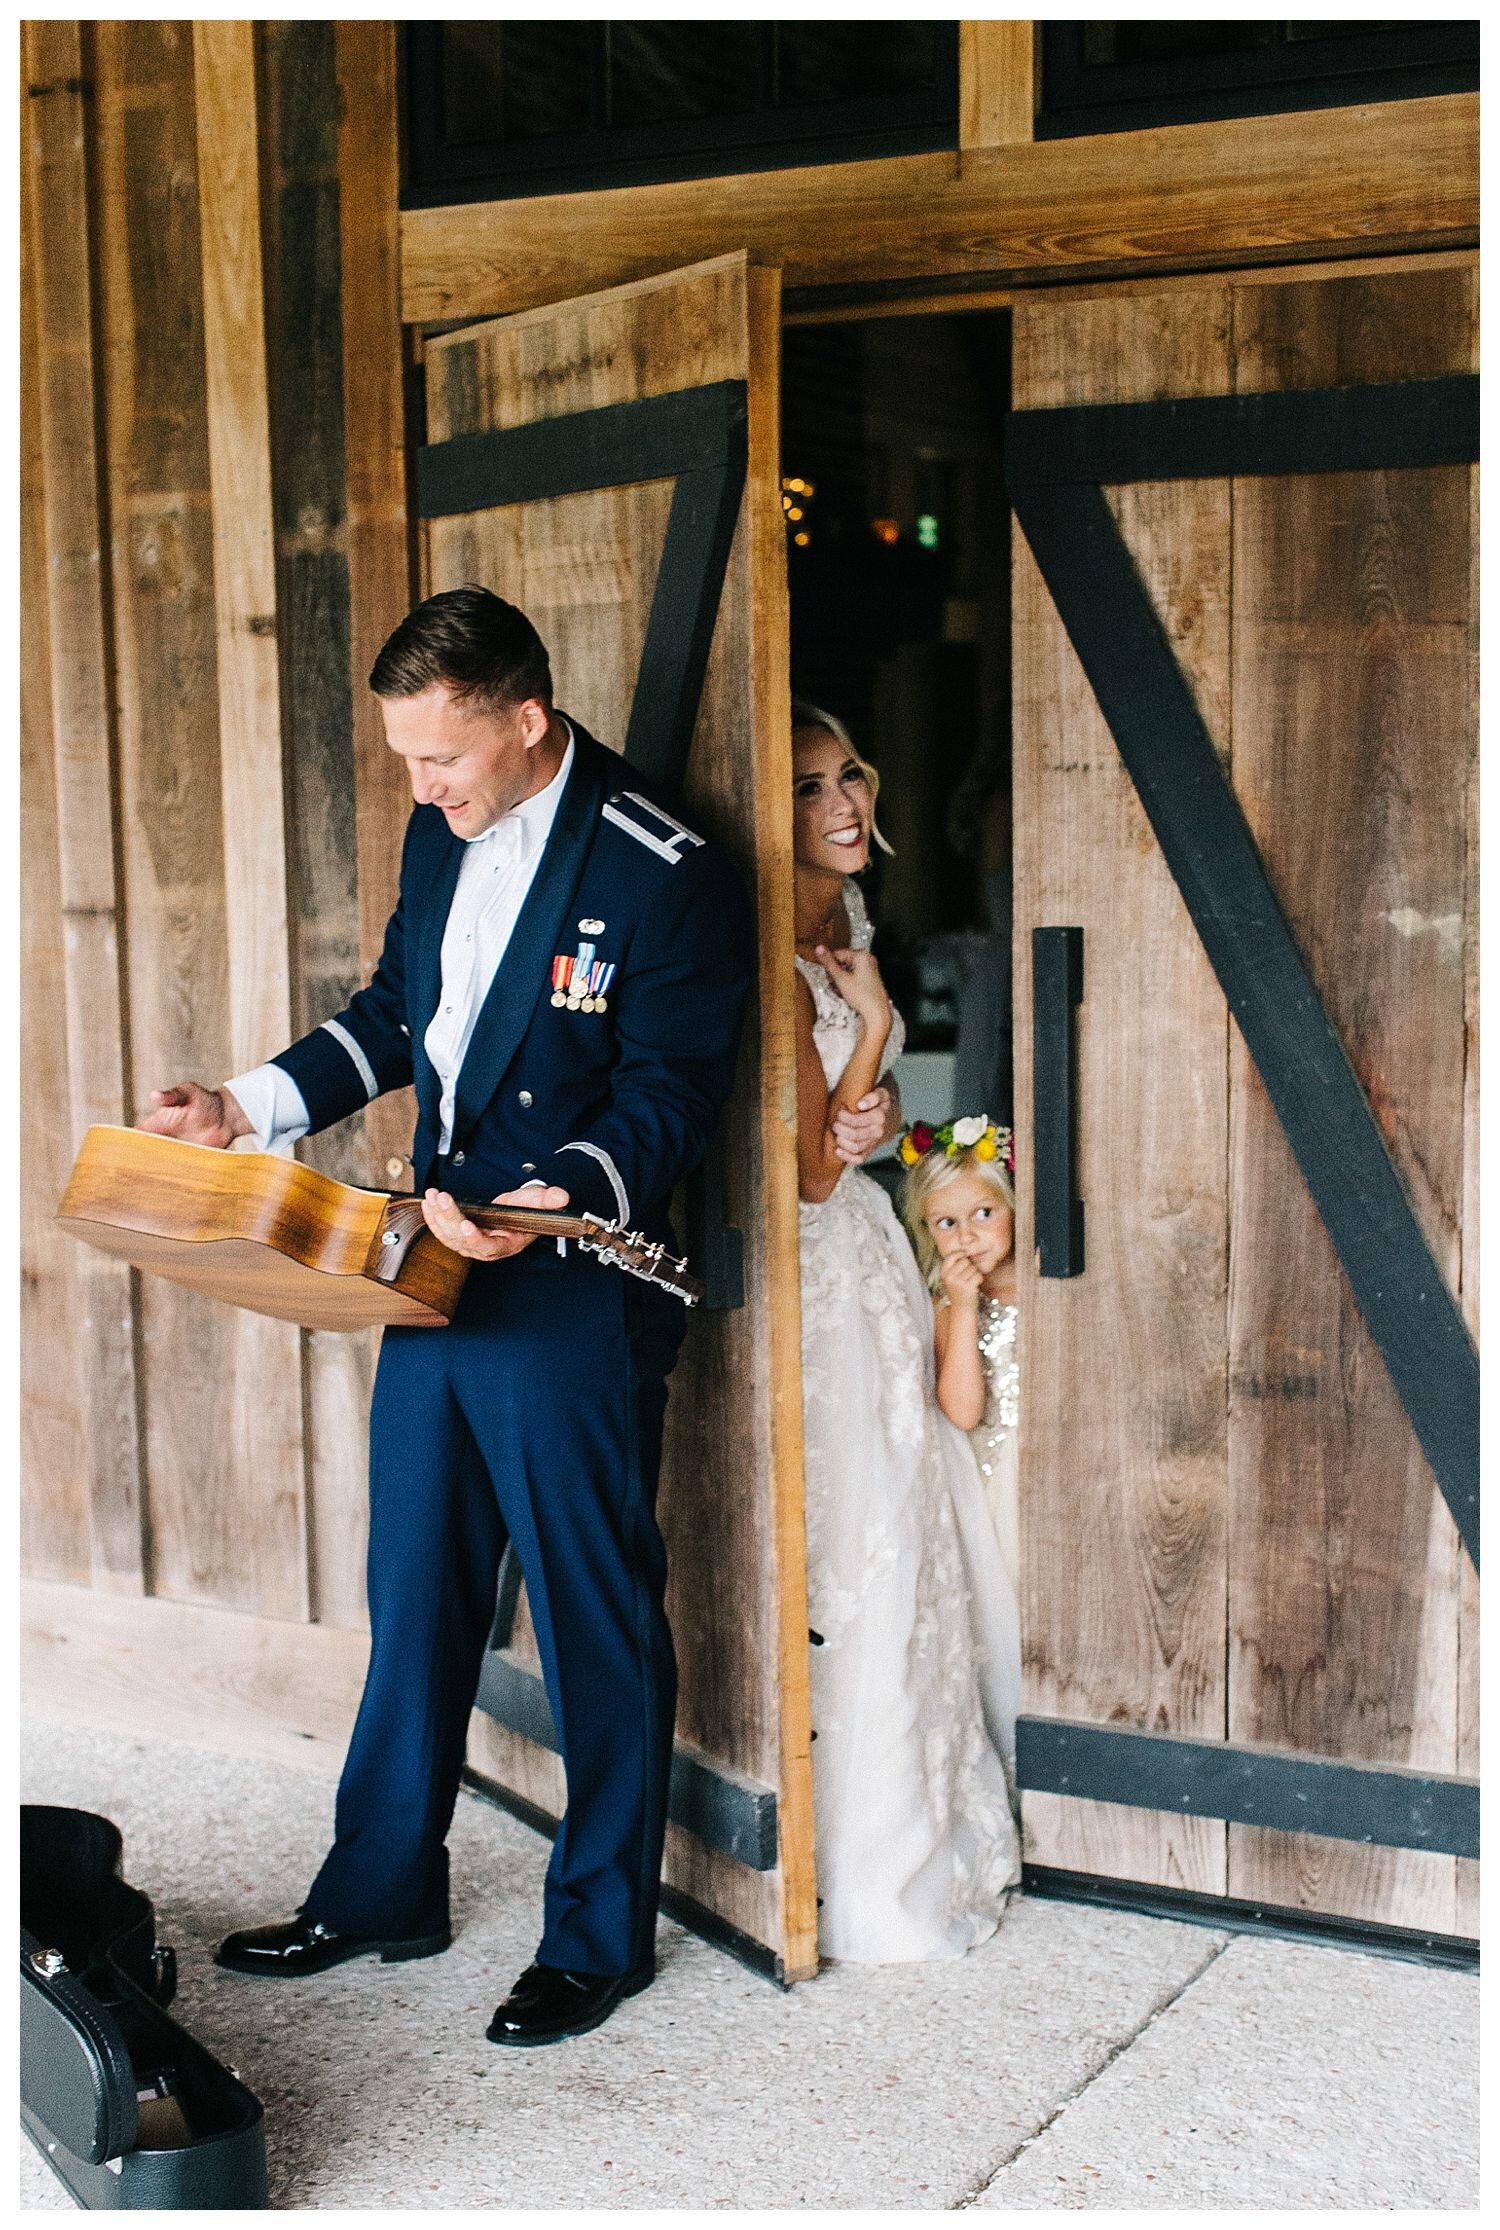 bride gives groom guitar as gift